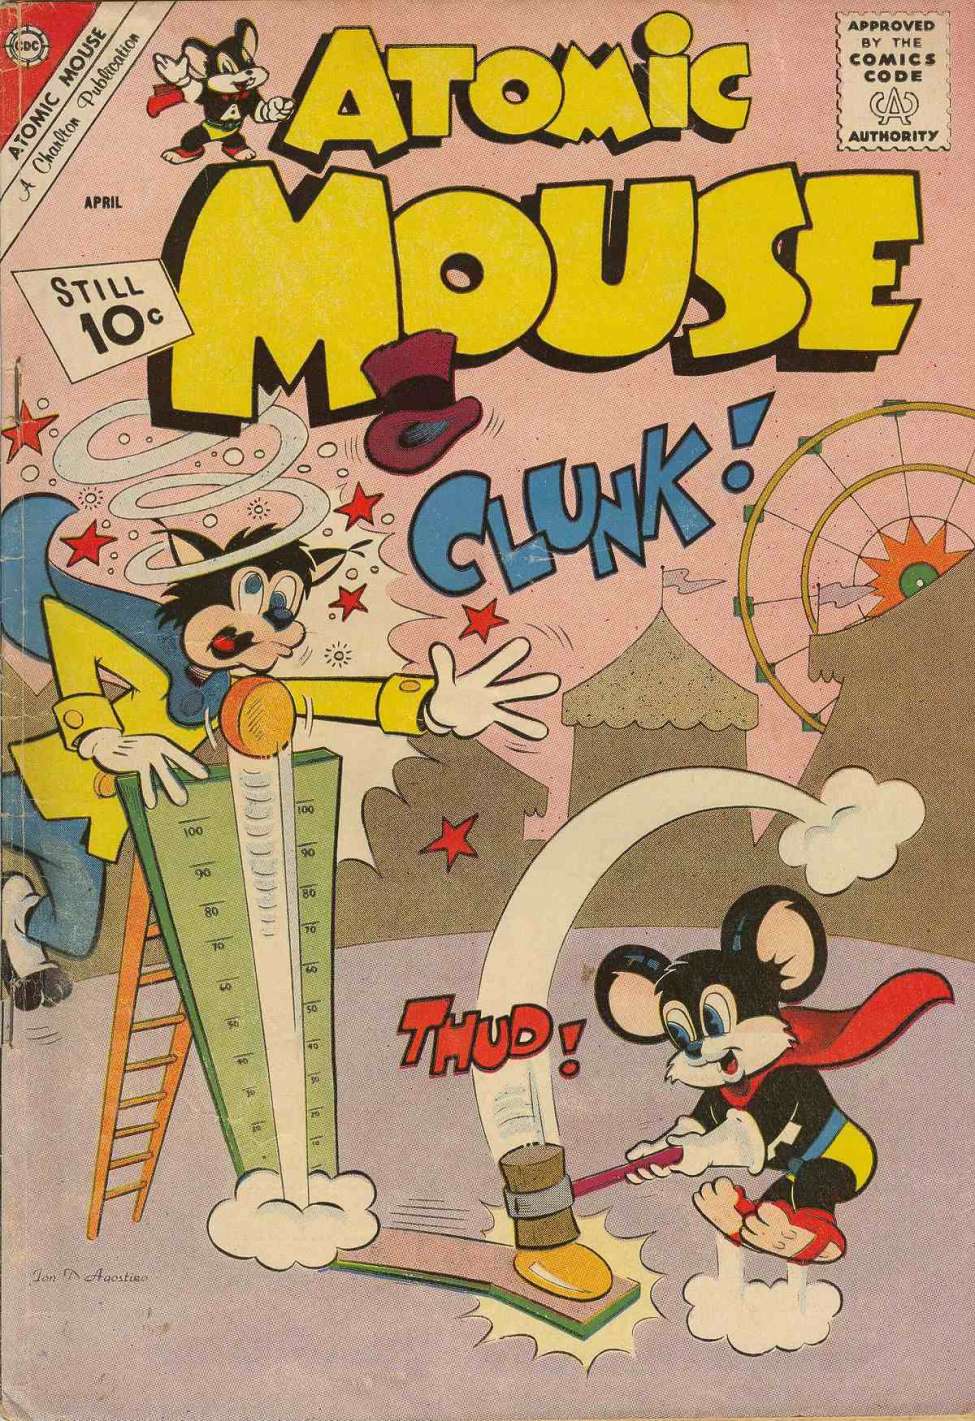 Book Cover For Atomic Mouse 47